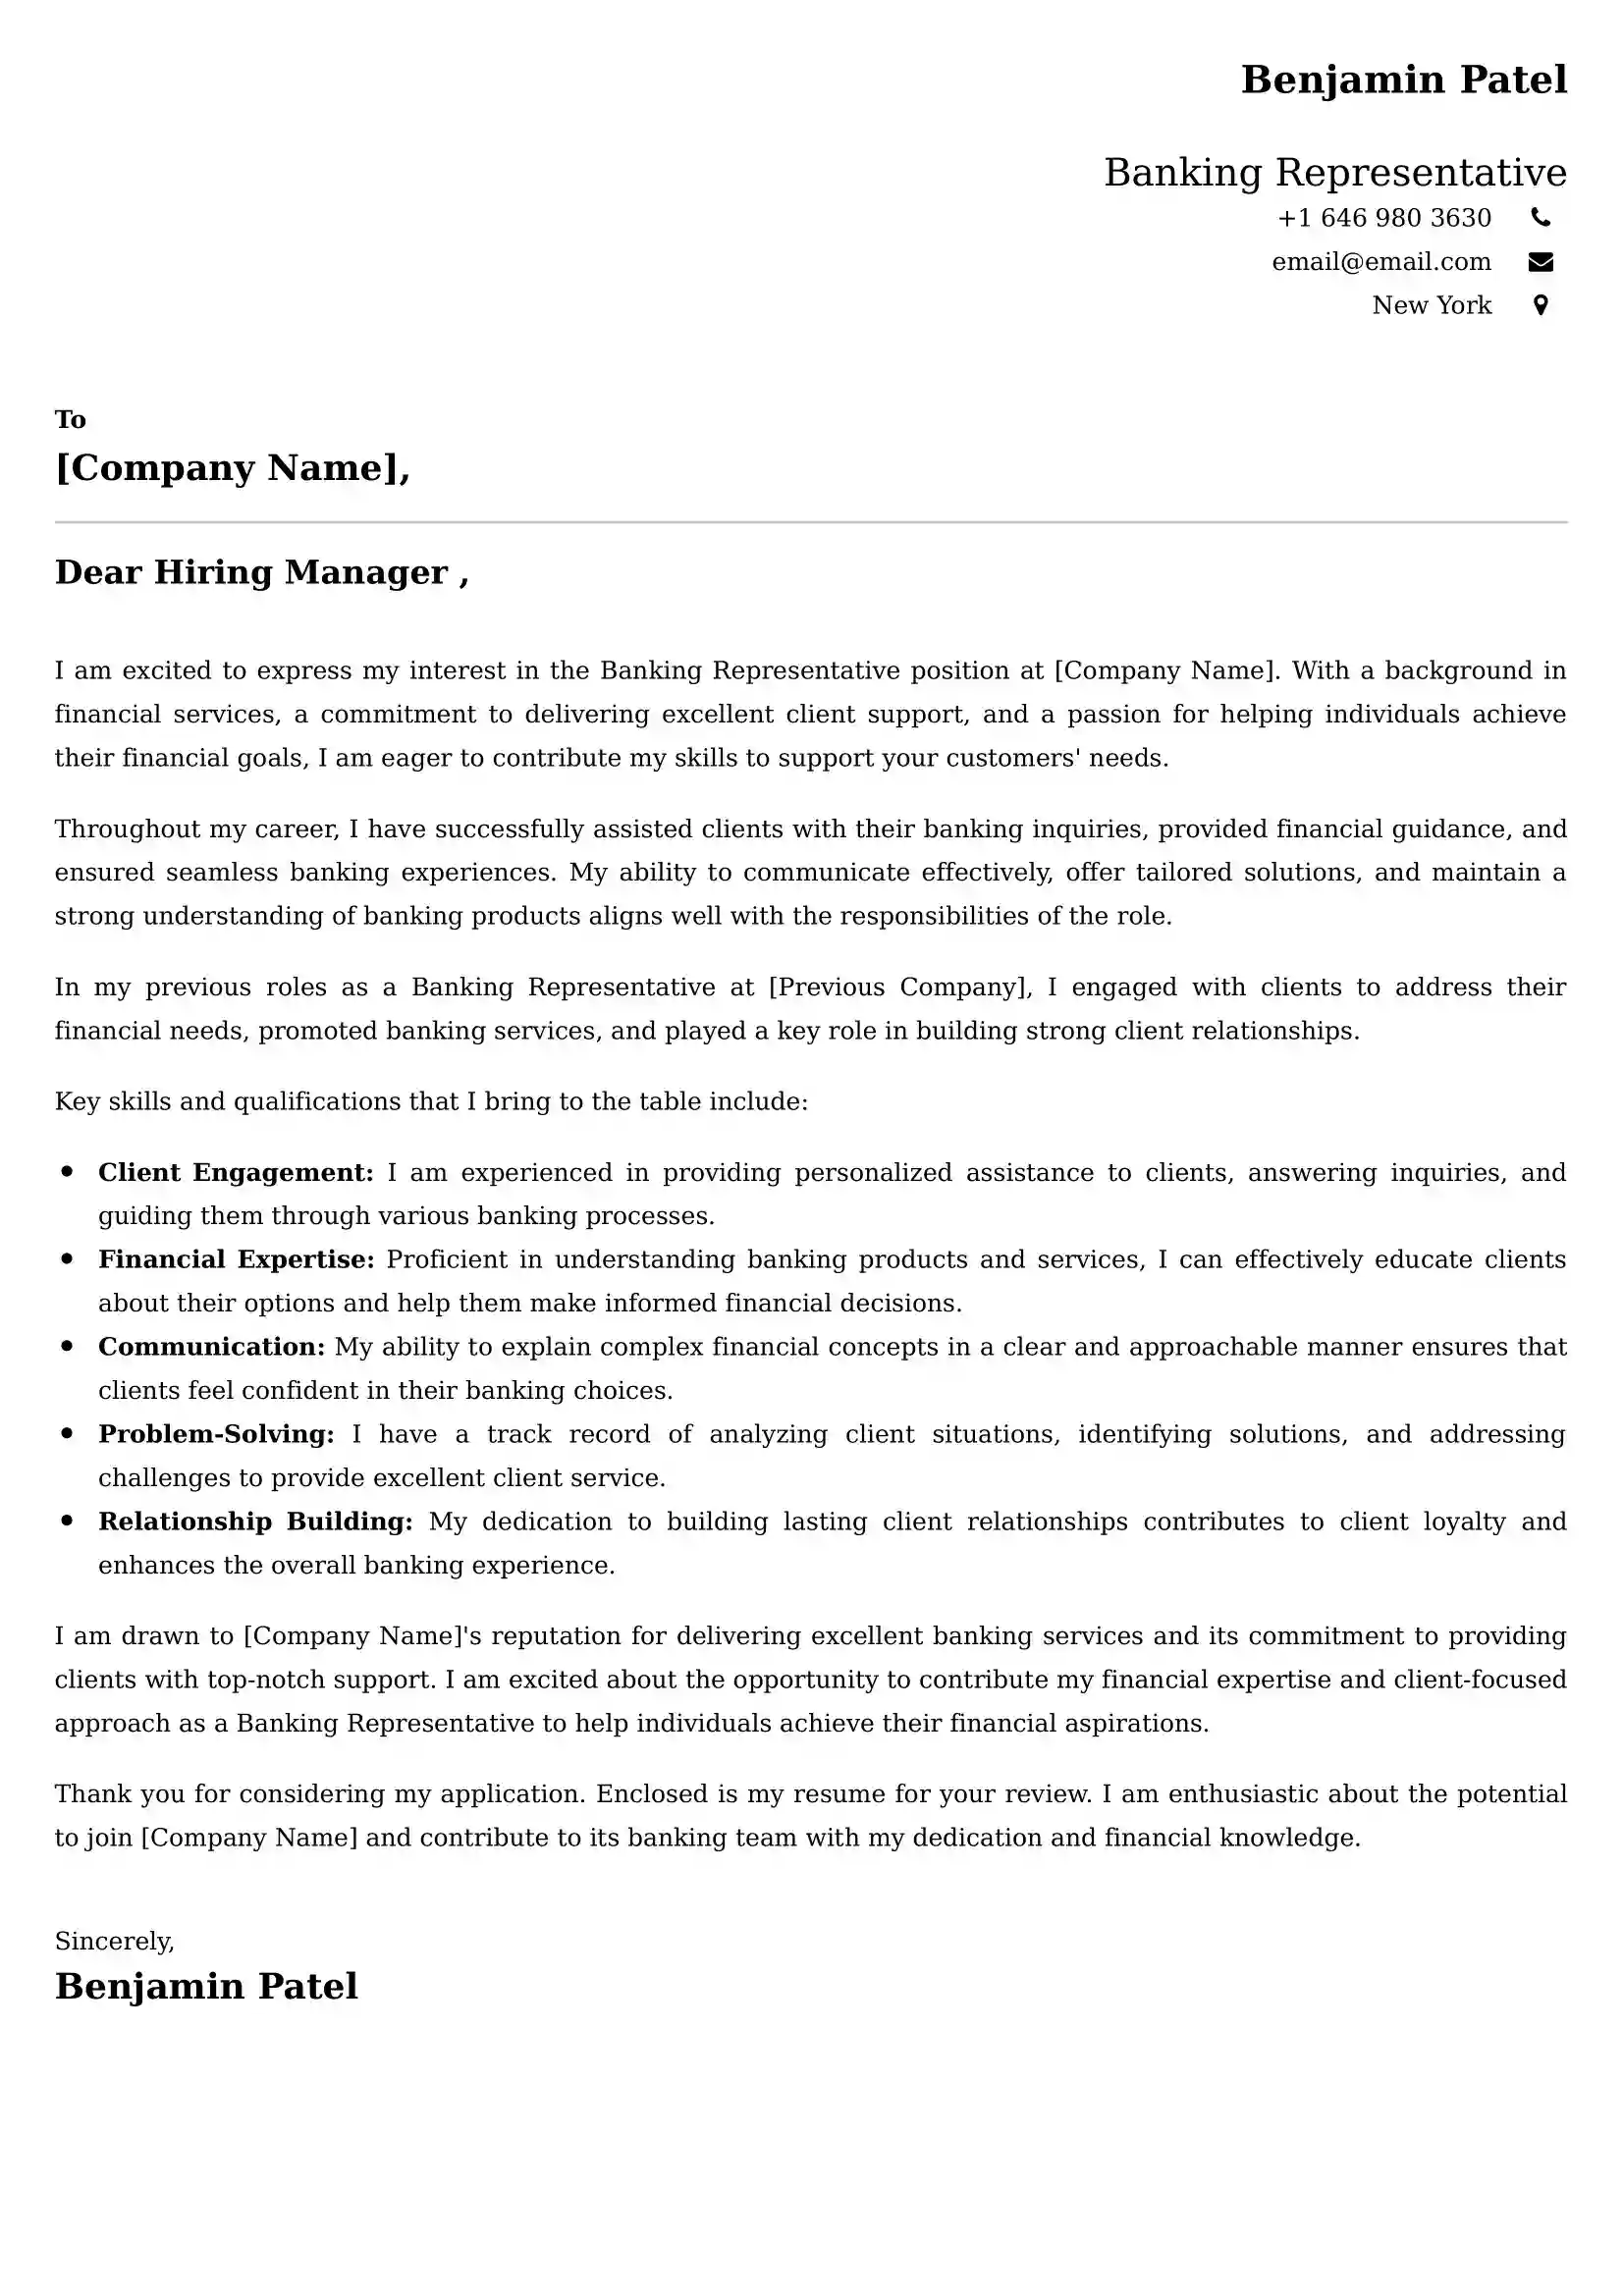 Effective Customer Service Cover Letter Examples | 65+ ATS-Optimized Templates